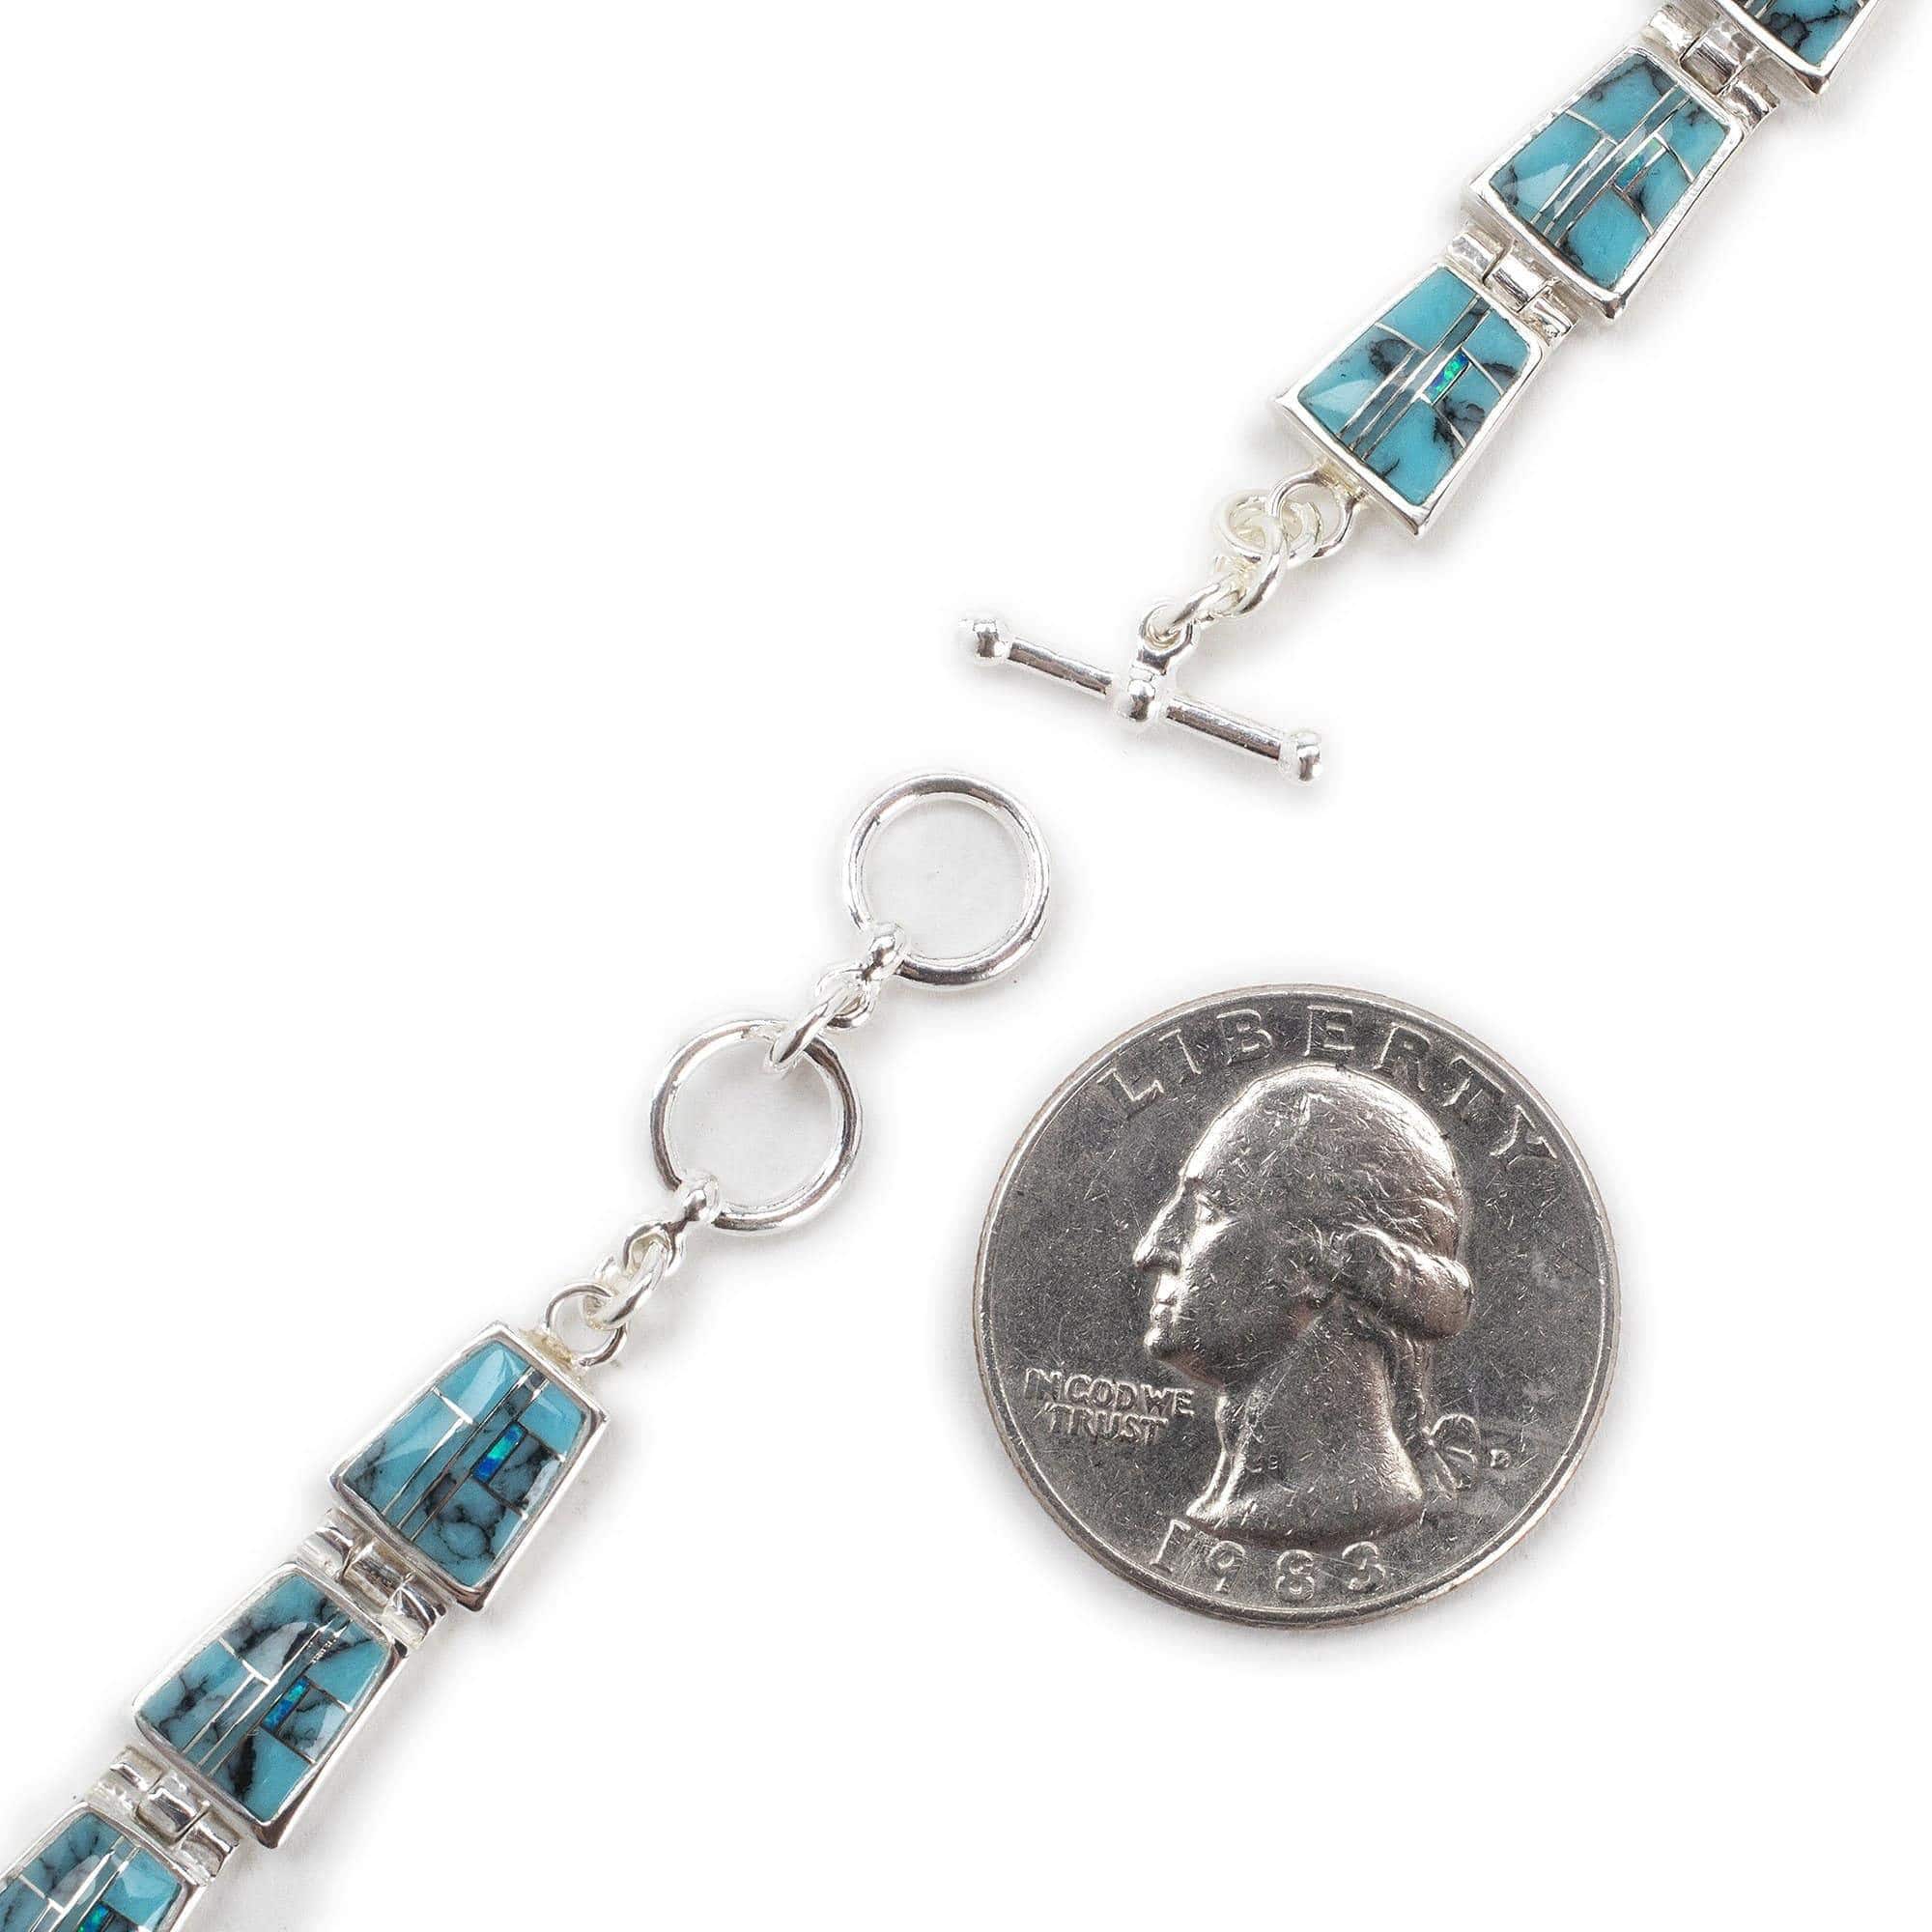 Kalifano Southwest Silver Jewelry Turquoise 925 Sterling Silver Bracelet USA Handmade with Opal Accent NMB.0240.TQ